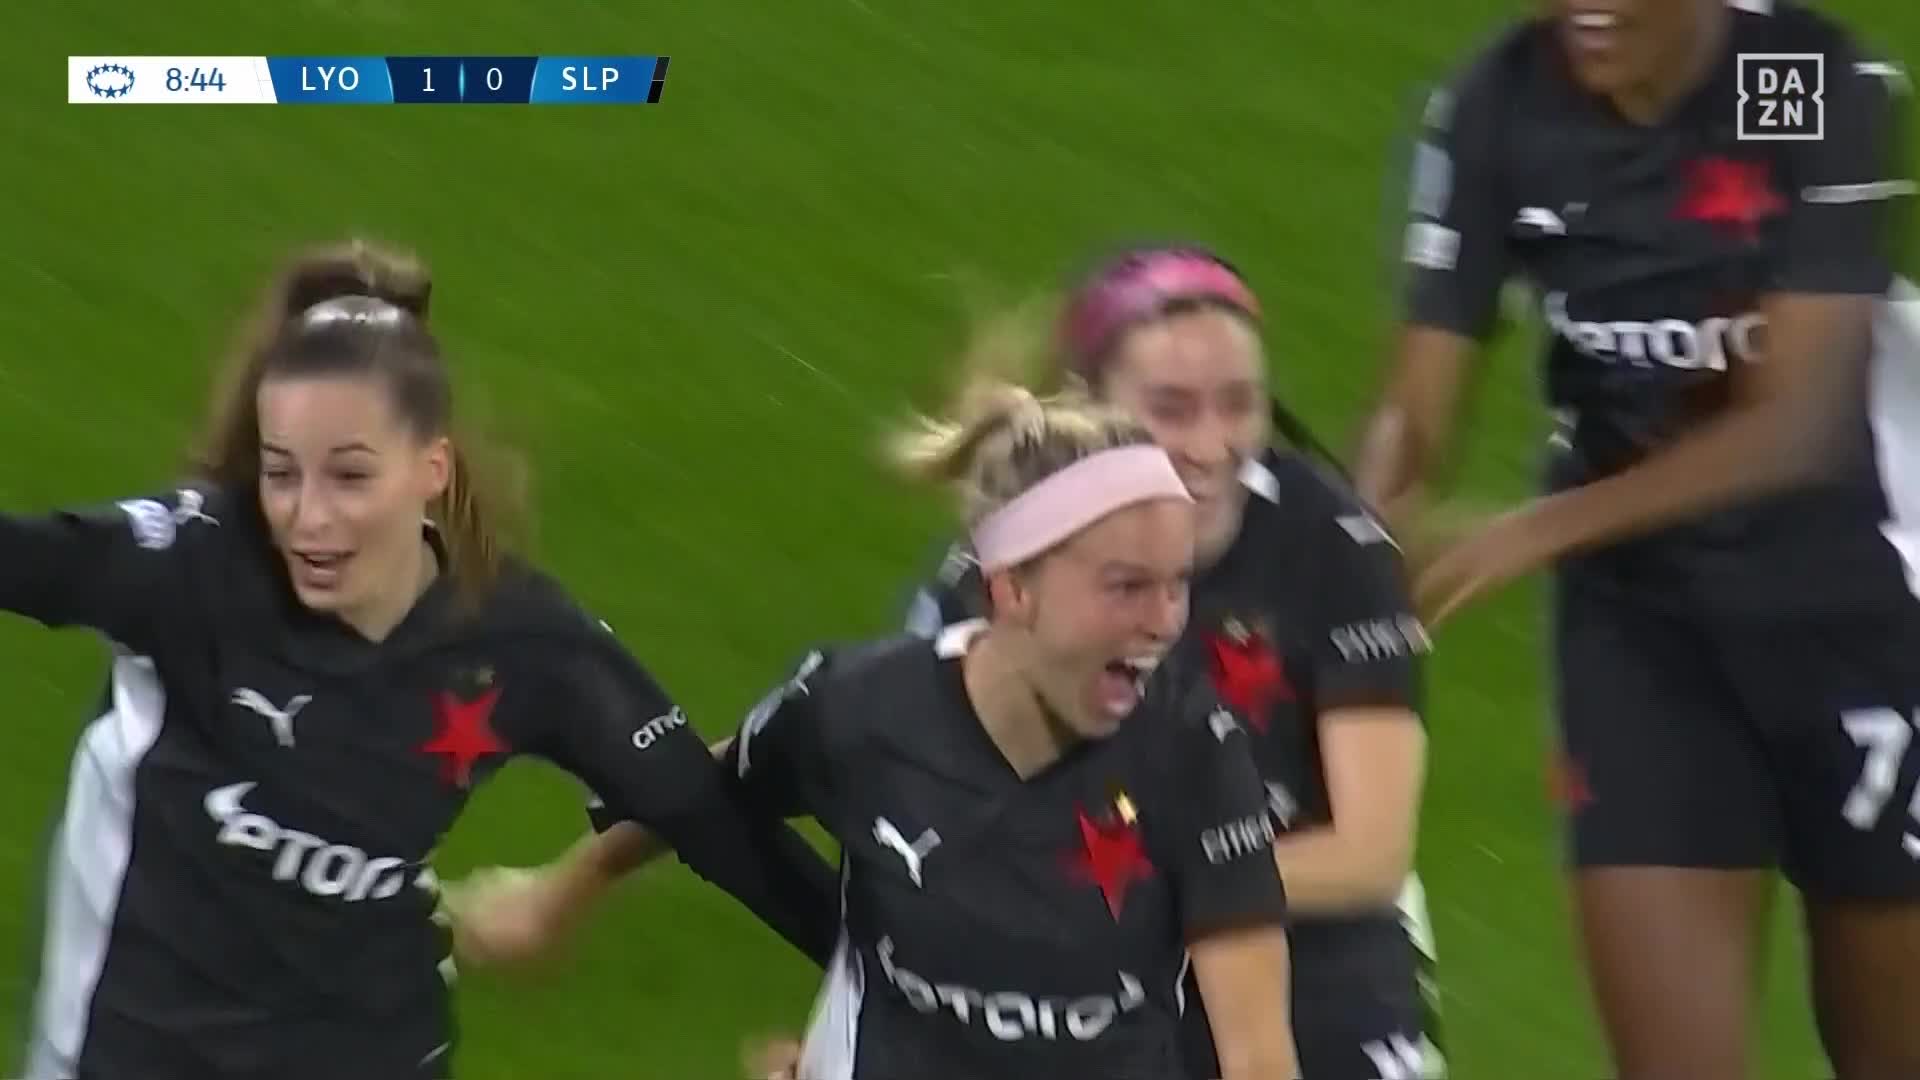 A Slavia Praha reaction comes by way of Franny Cerná! 😳Watch the UWCL LIVE for FREE on DAZN 👉  #UWCLonDAZN